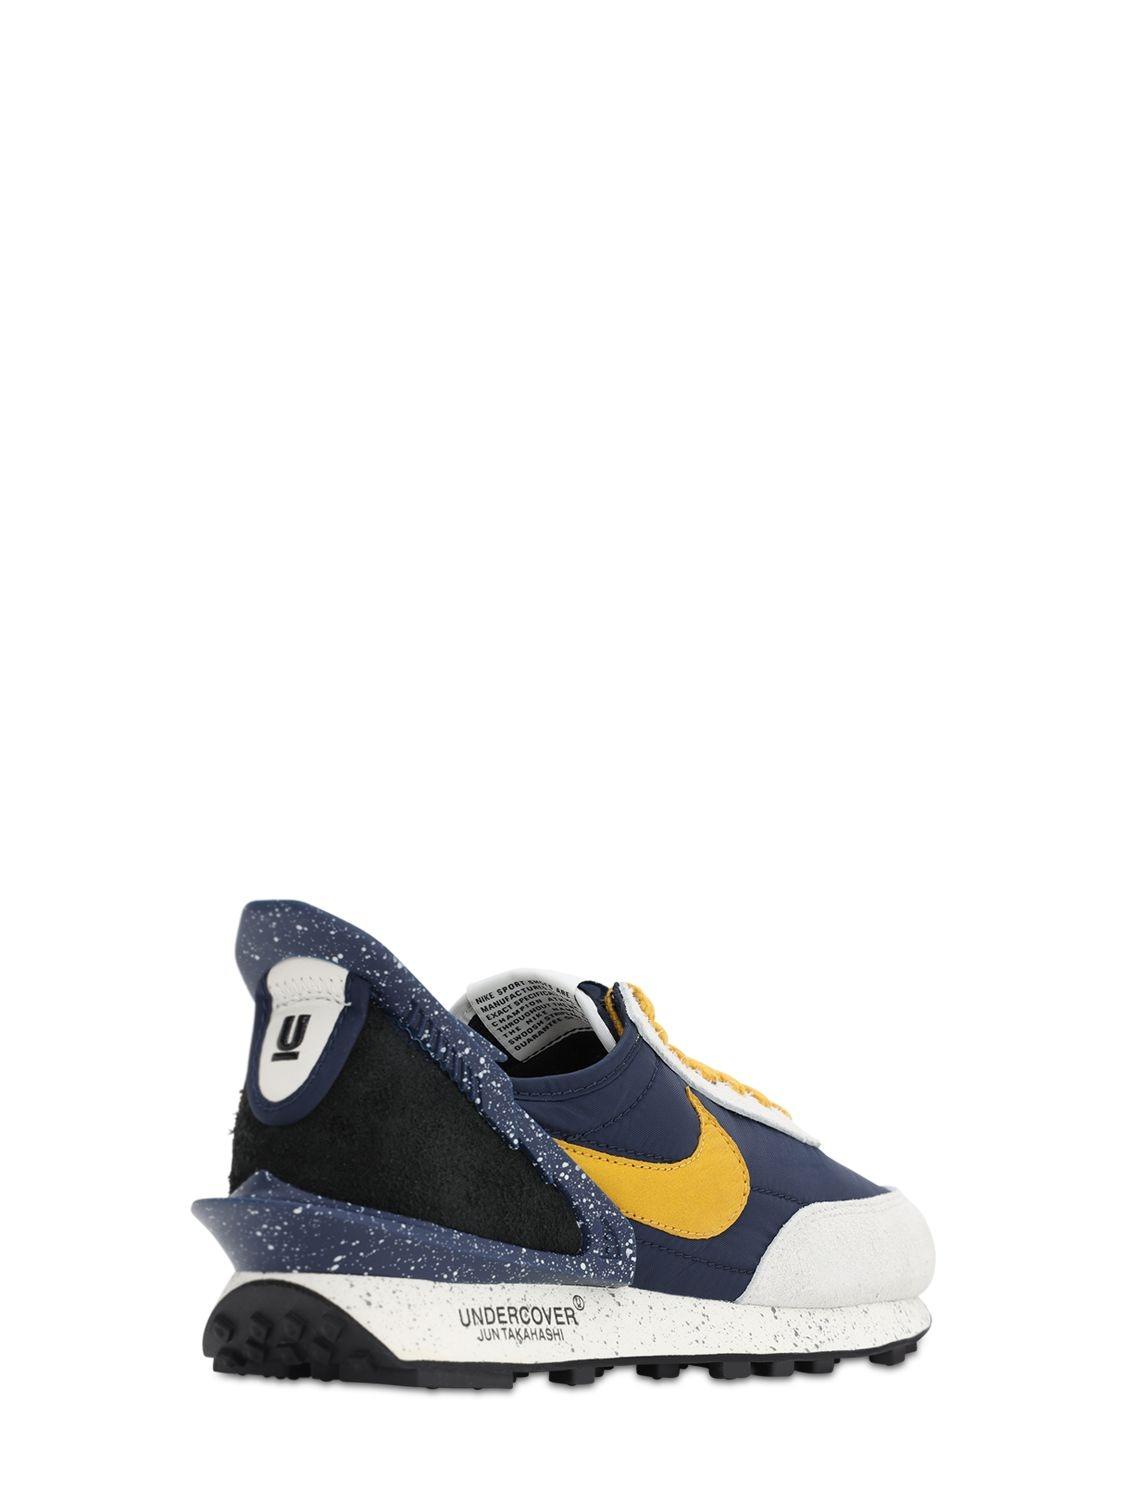 Nike Synthetic Daybreak / Undercover Sneakers in Blue/Gold (Blue) - Lyst